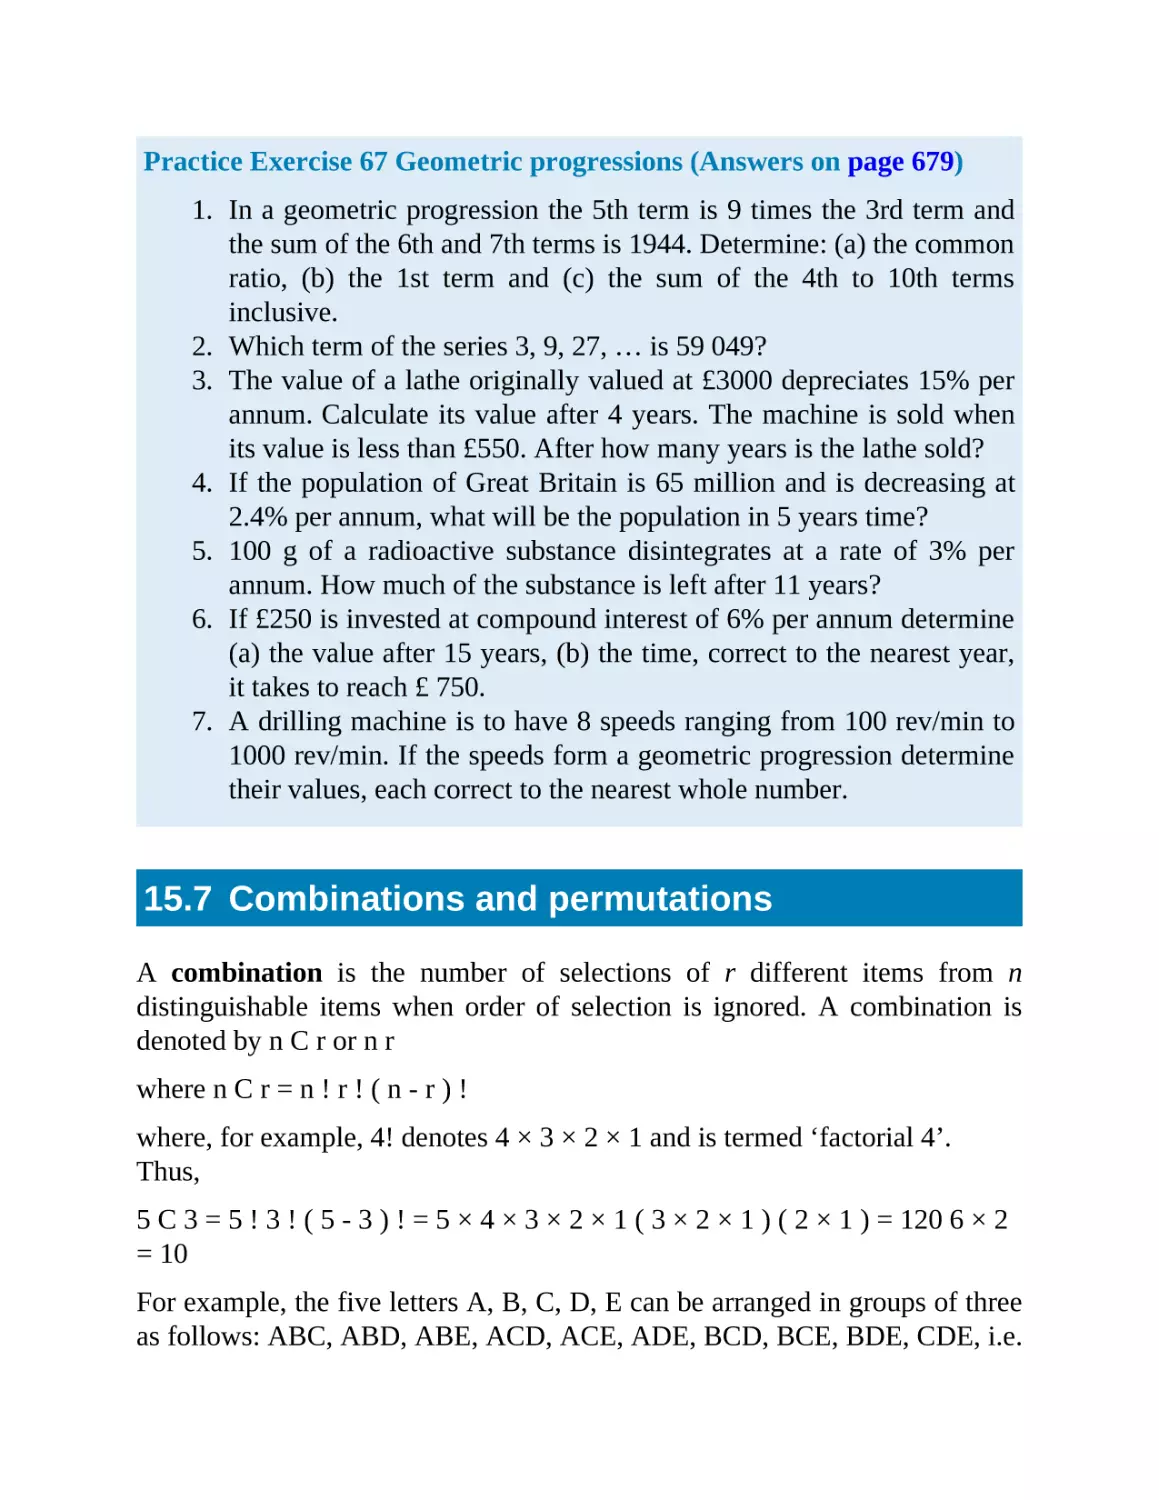 15.7 Combinations and permutations